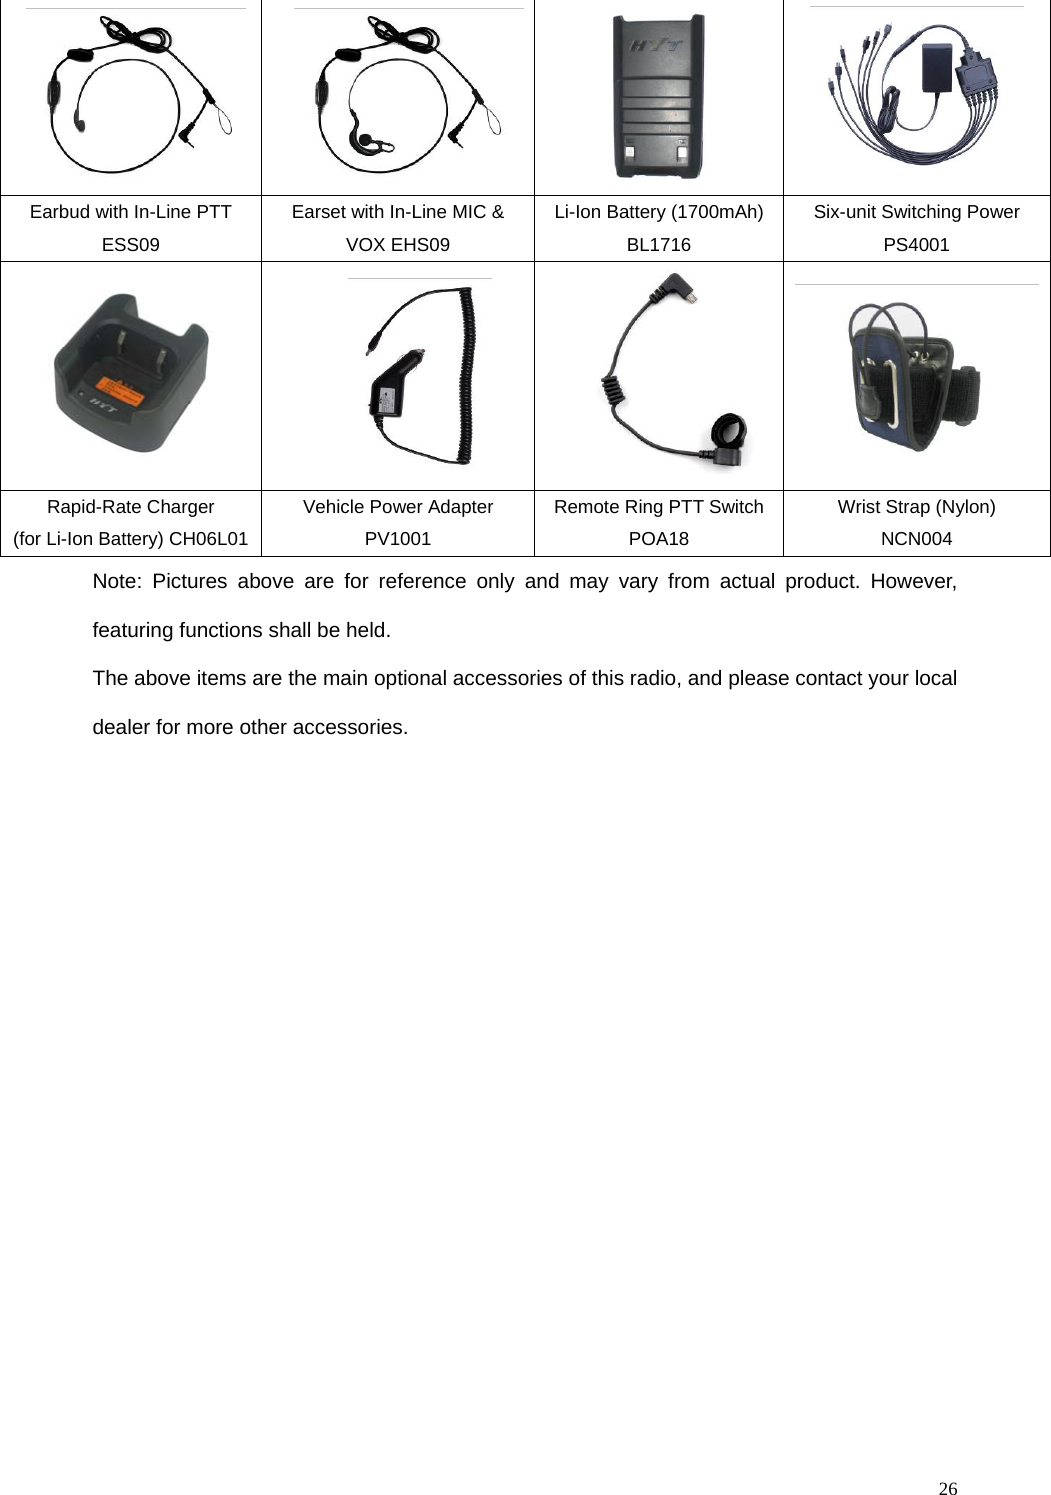   26   Earbud with In-Line PTT ESS09   Earset with In-Line MIC &amp; VOX EHS09   Li-Ion Battery (1700mAh) BL1716   Six-unit Switching Power PS4001     Rapid-Rate Charger   (for Li-Ion Battery) CH06L01   Vehicle Power Adapter PV1001   Remote Ring PTT Switch POA18   Wrist Strap (Nylon)   NCN004   Note: Pictures above are for reference only and may vary from actual product. However, featuring functions shall be held.   The above items are the main optional accessories of this radio, and please contact your local dealer for more other accessories.   